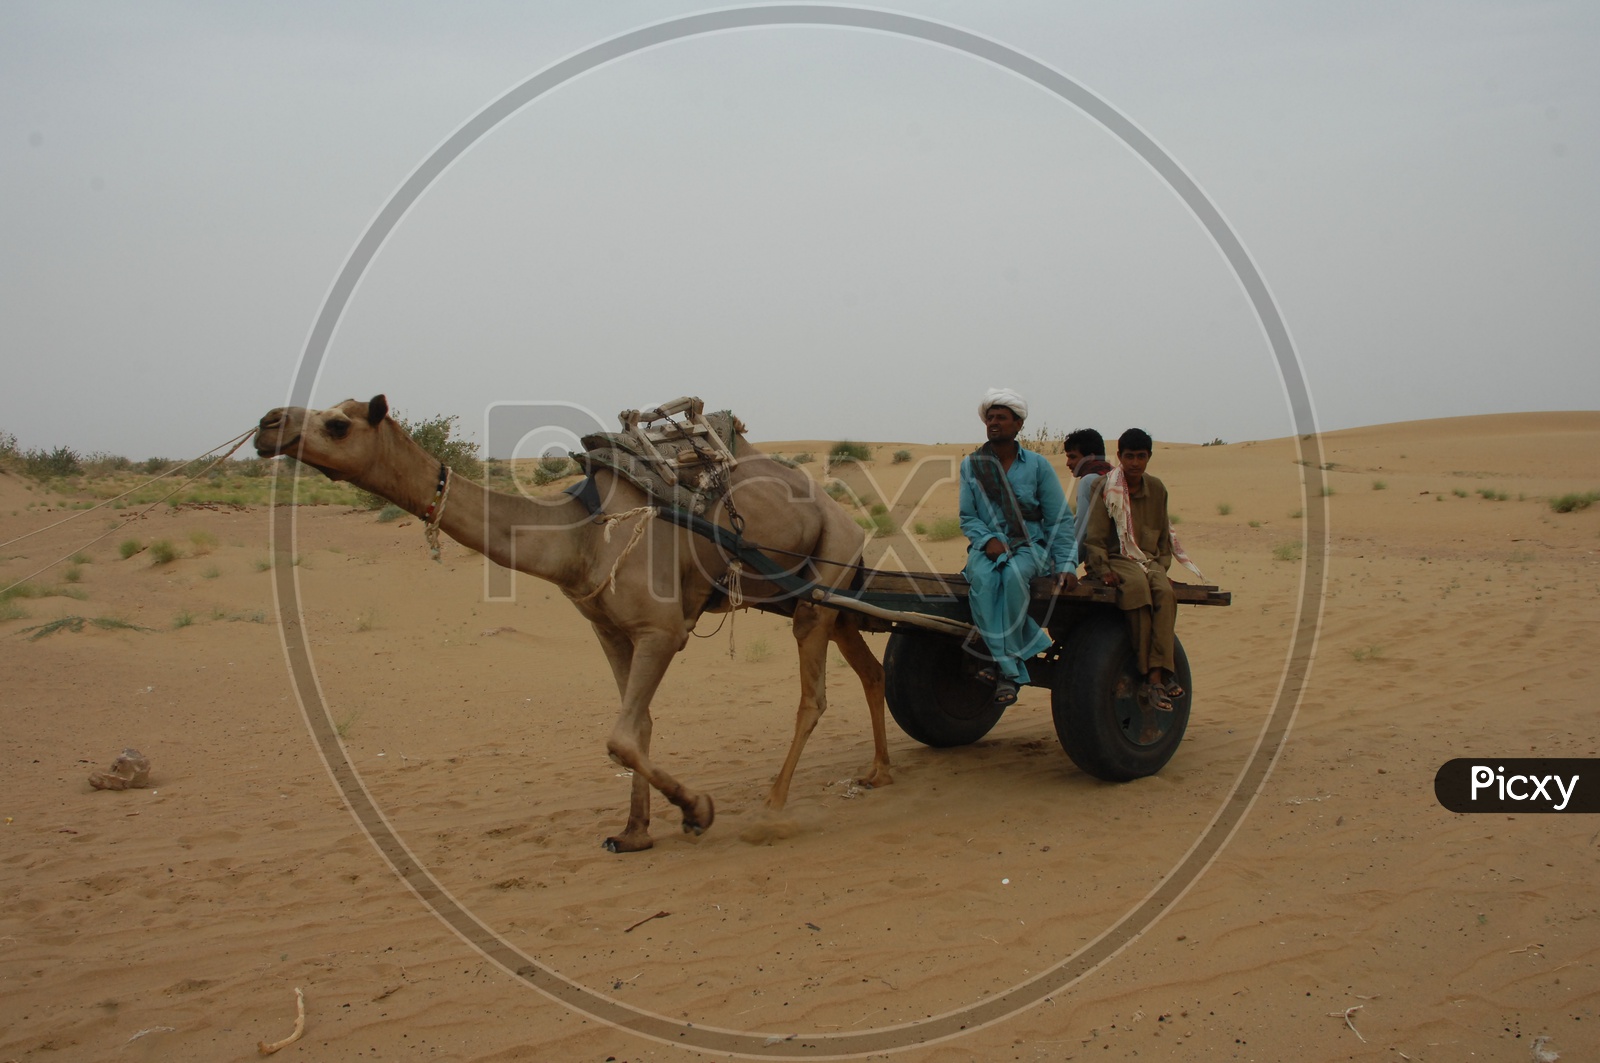 camel cart carrying people in a desert